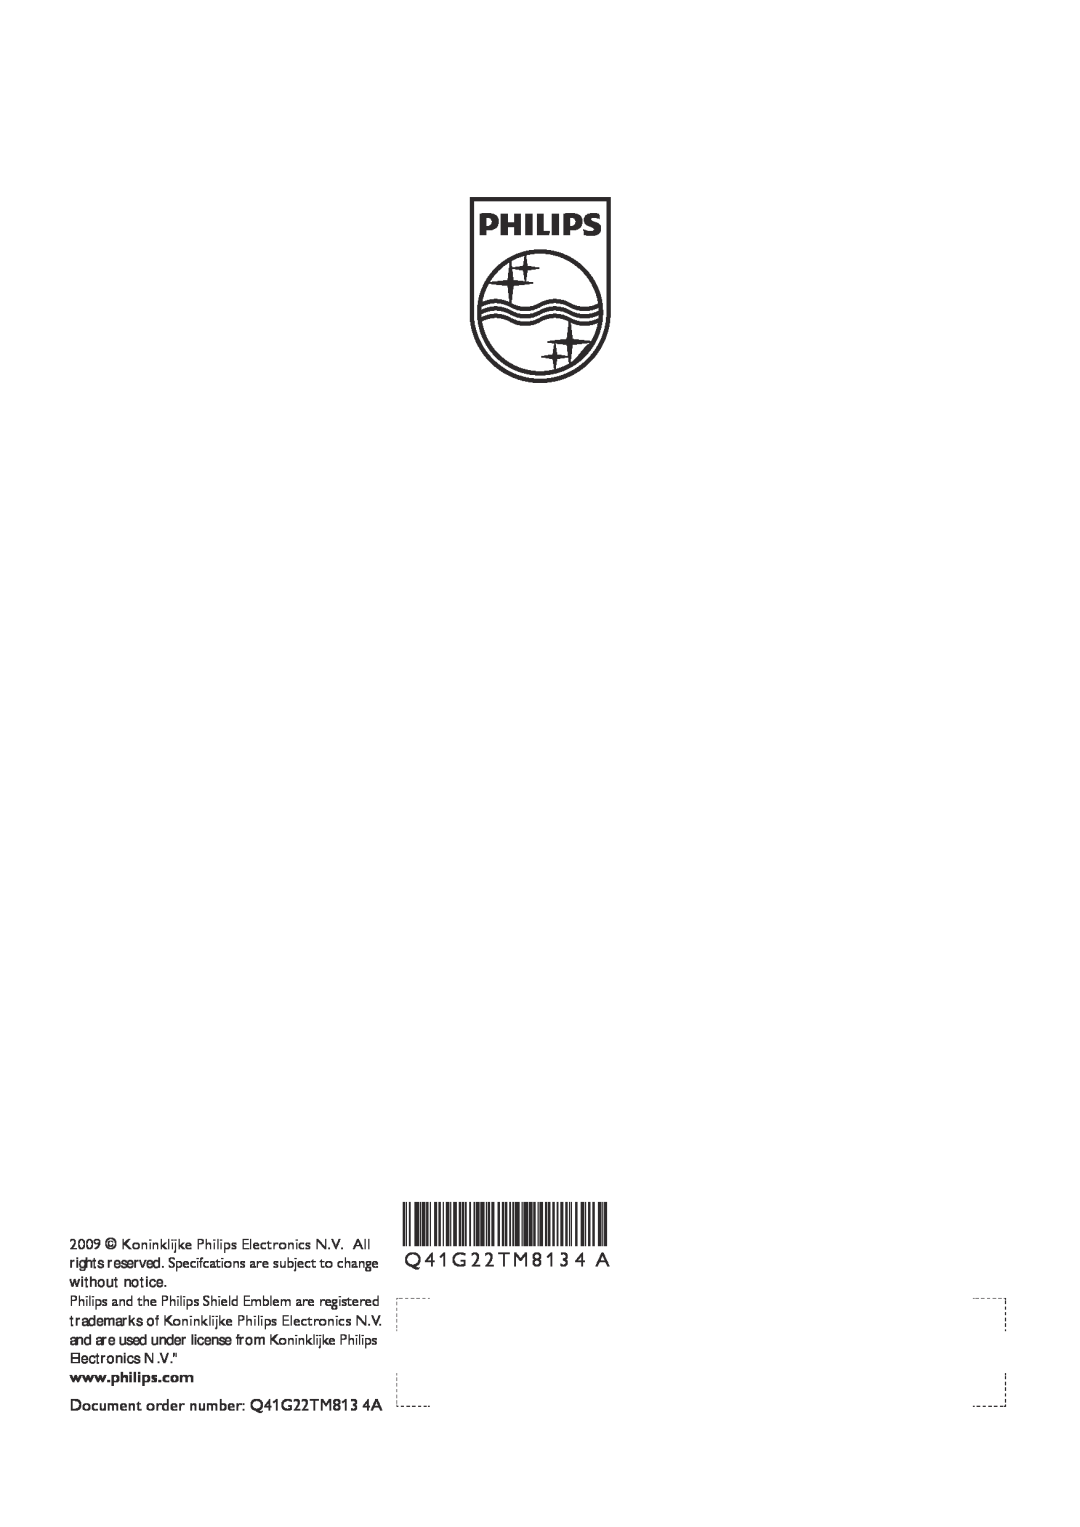 Philips 201T1 user manual Q 4 1 G 2 2 T M 8 1 3 4 A 